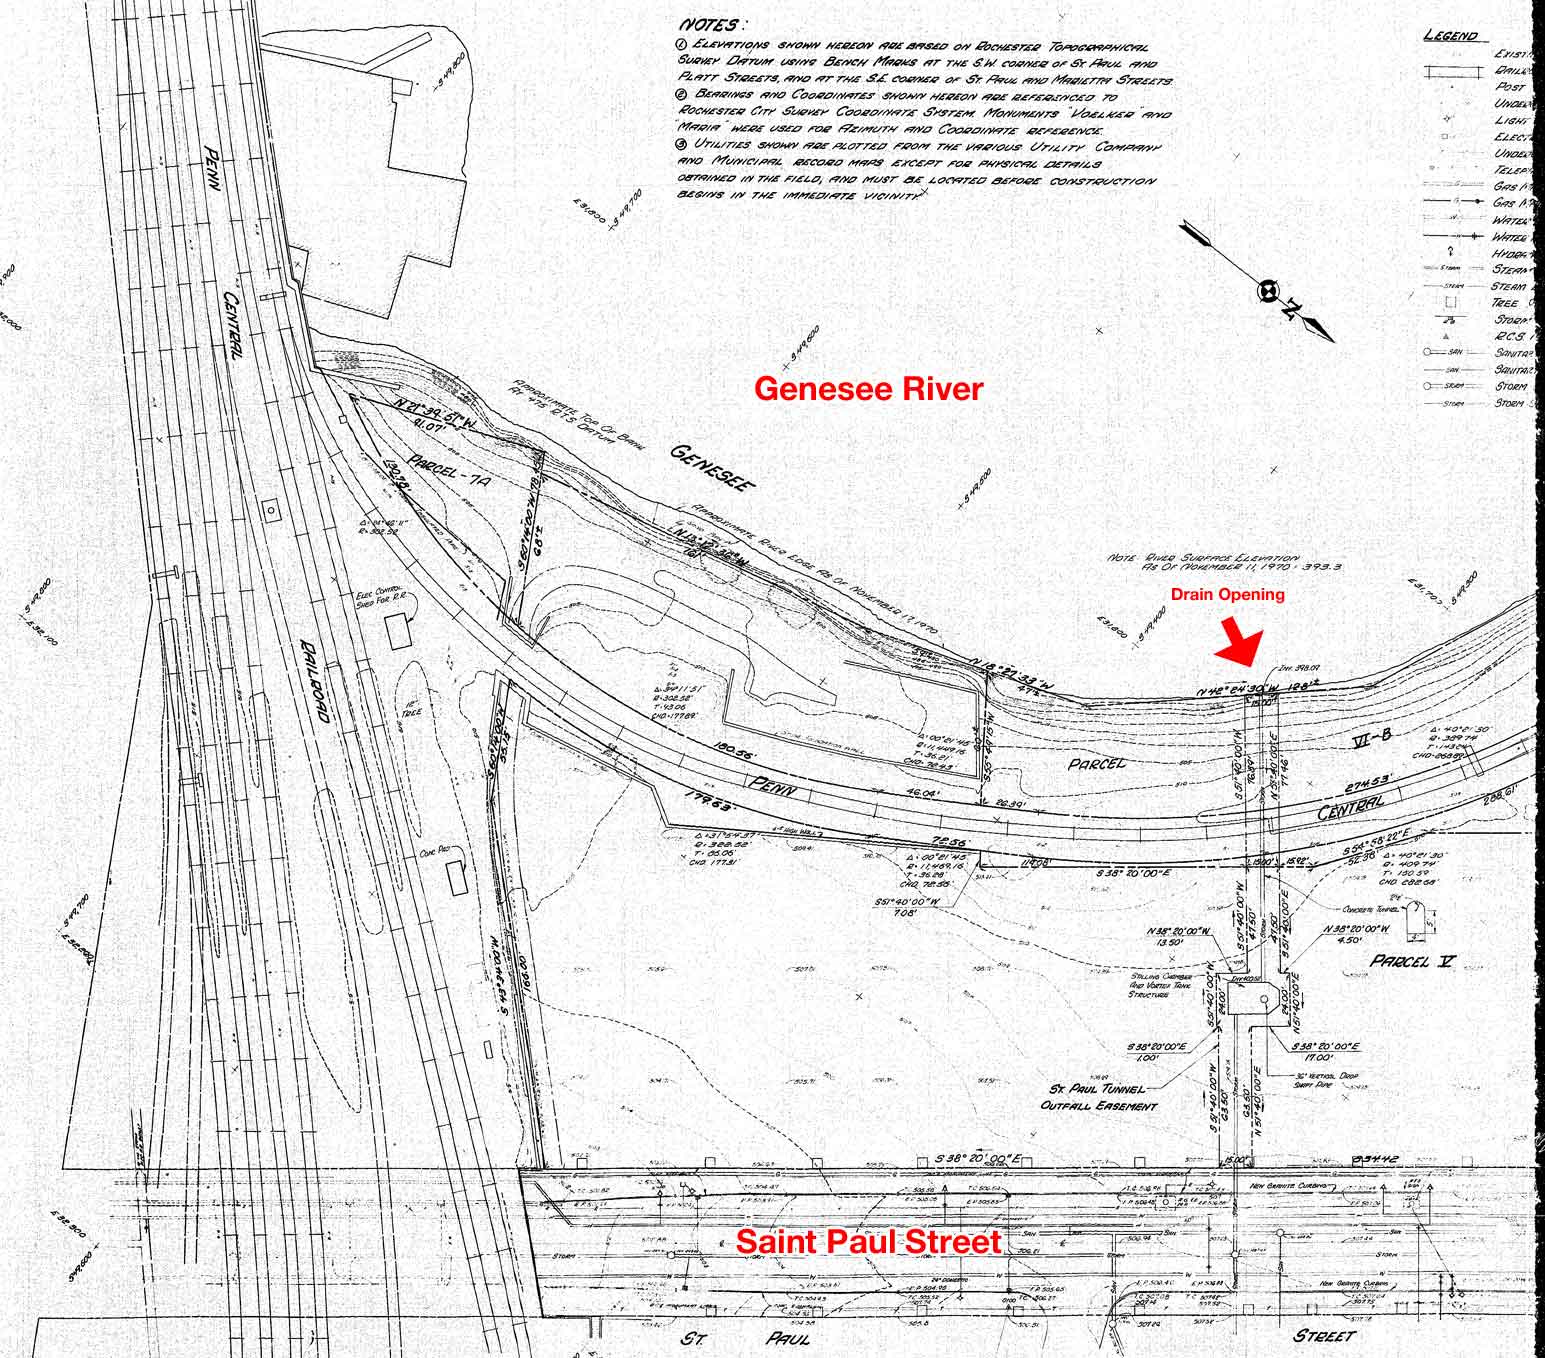 This mechanical drawing of Saint Paul Street and the eastern wall of High Falls gorge shows what's behind the door in the previous photo; a Saint Paul Street drainage tunnel. [via City of Rochester Engineer]